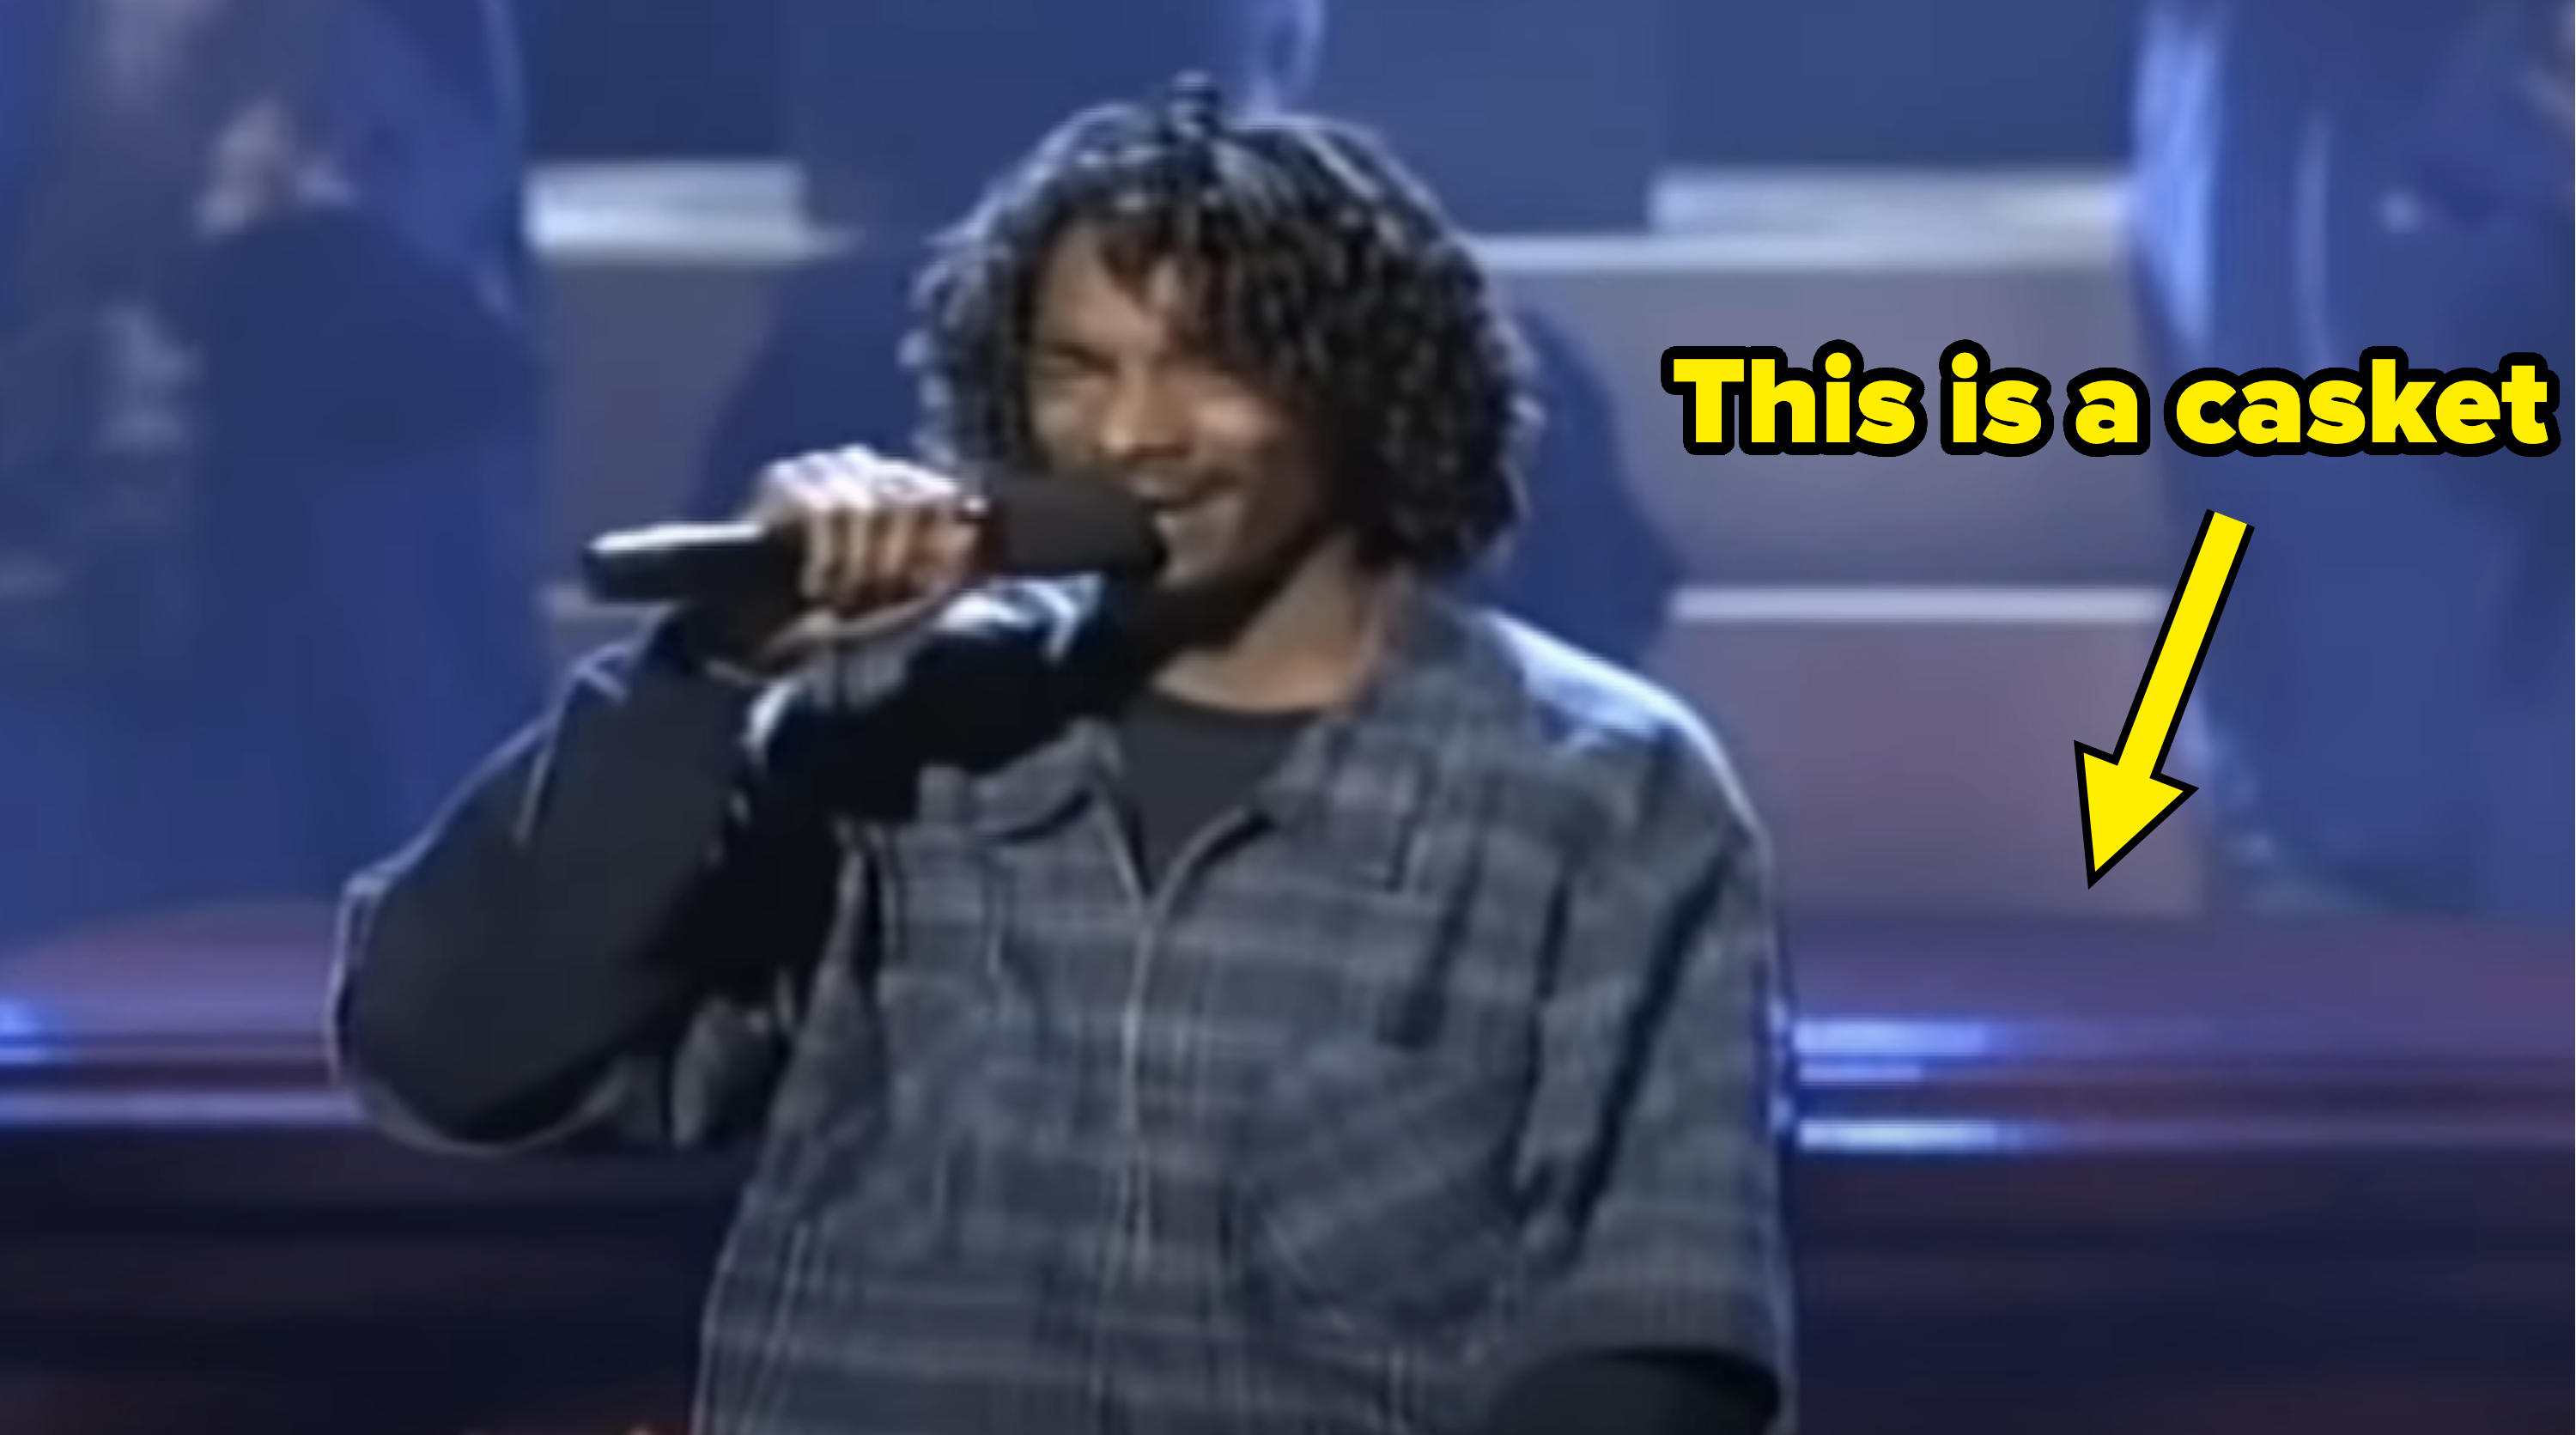 Snoop in a plaid shirt performing on stage with a microphone